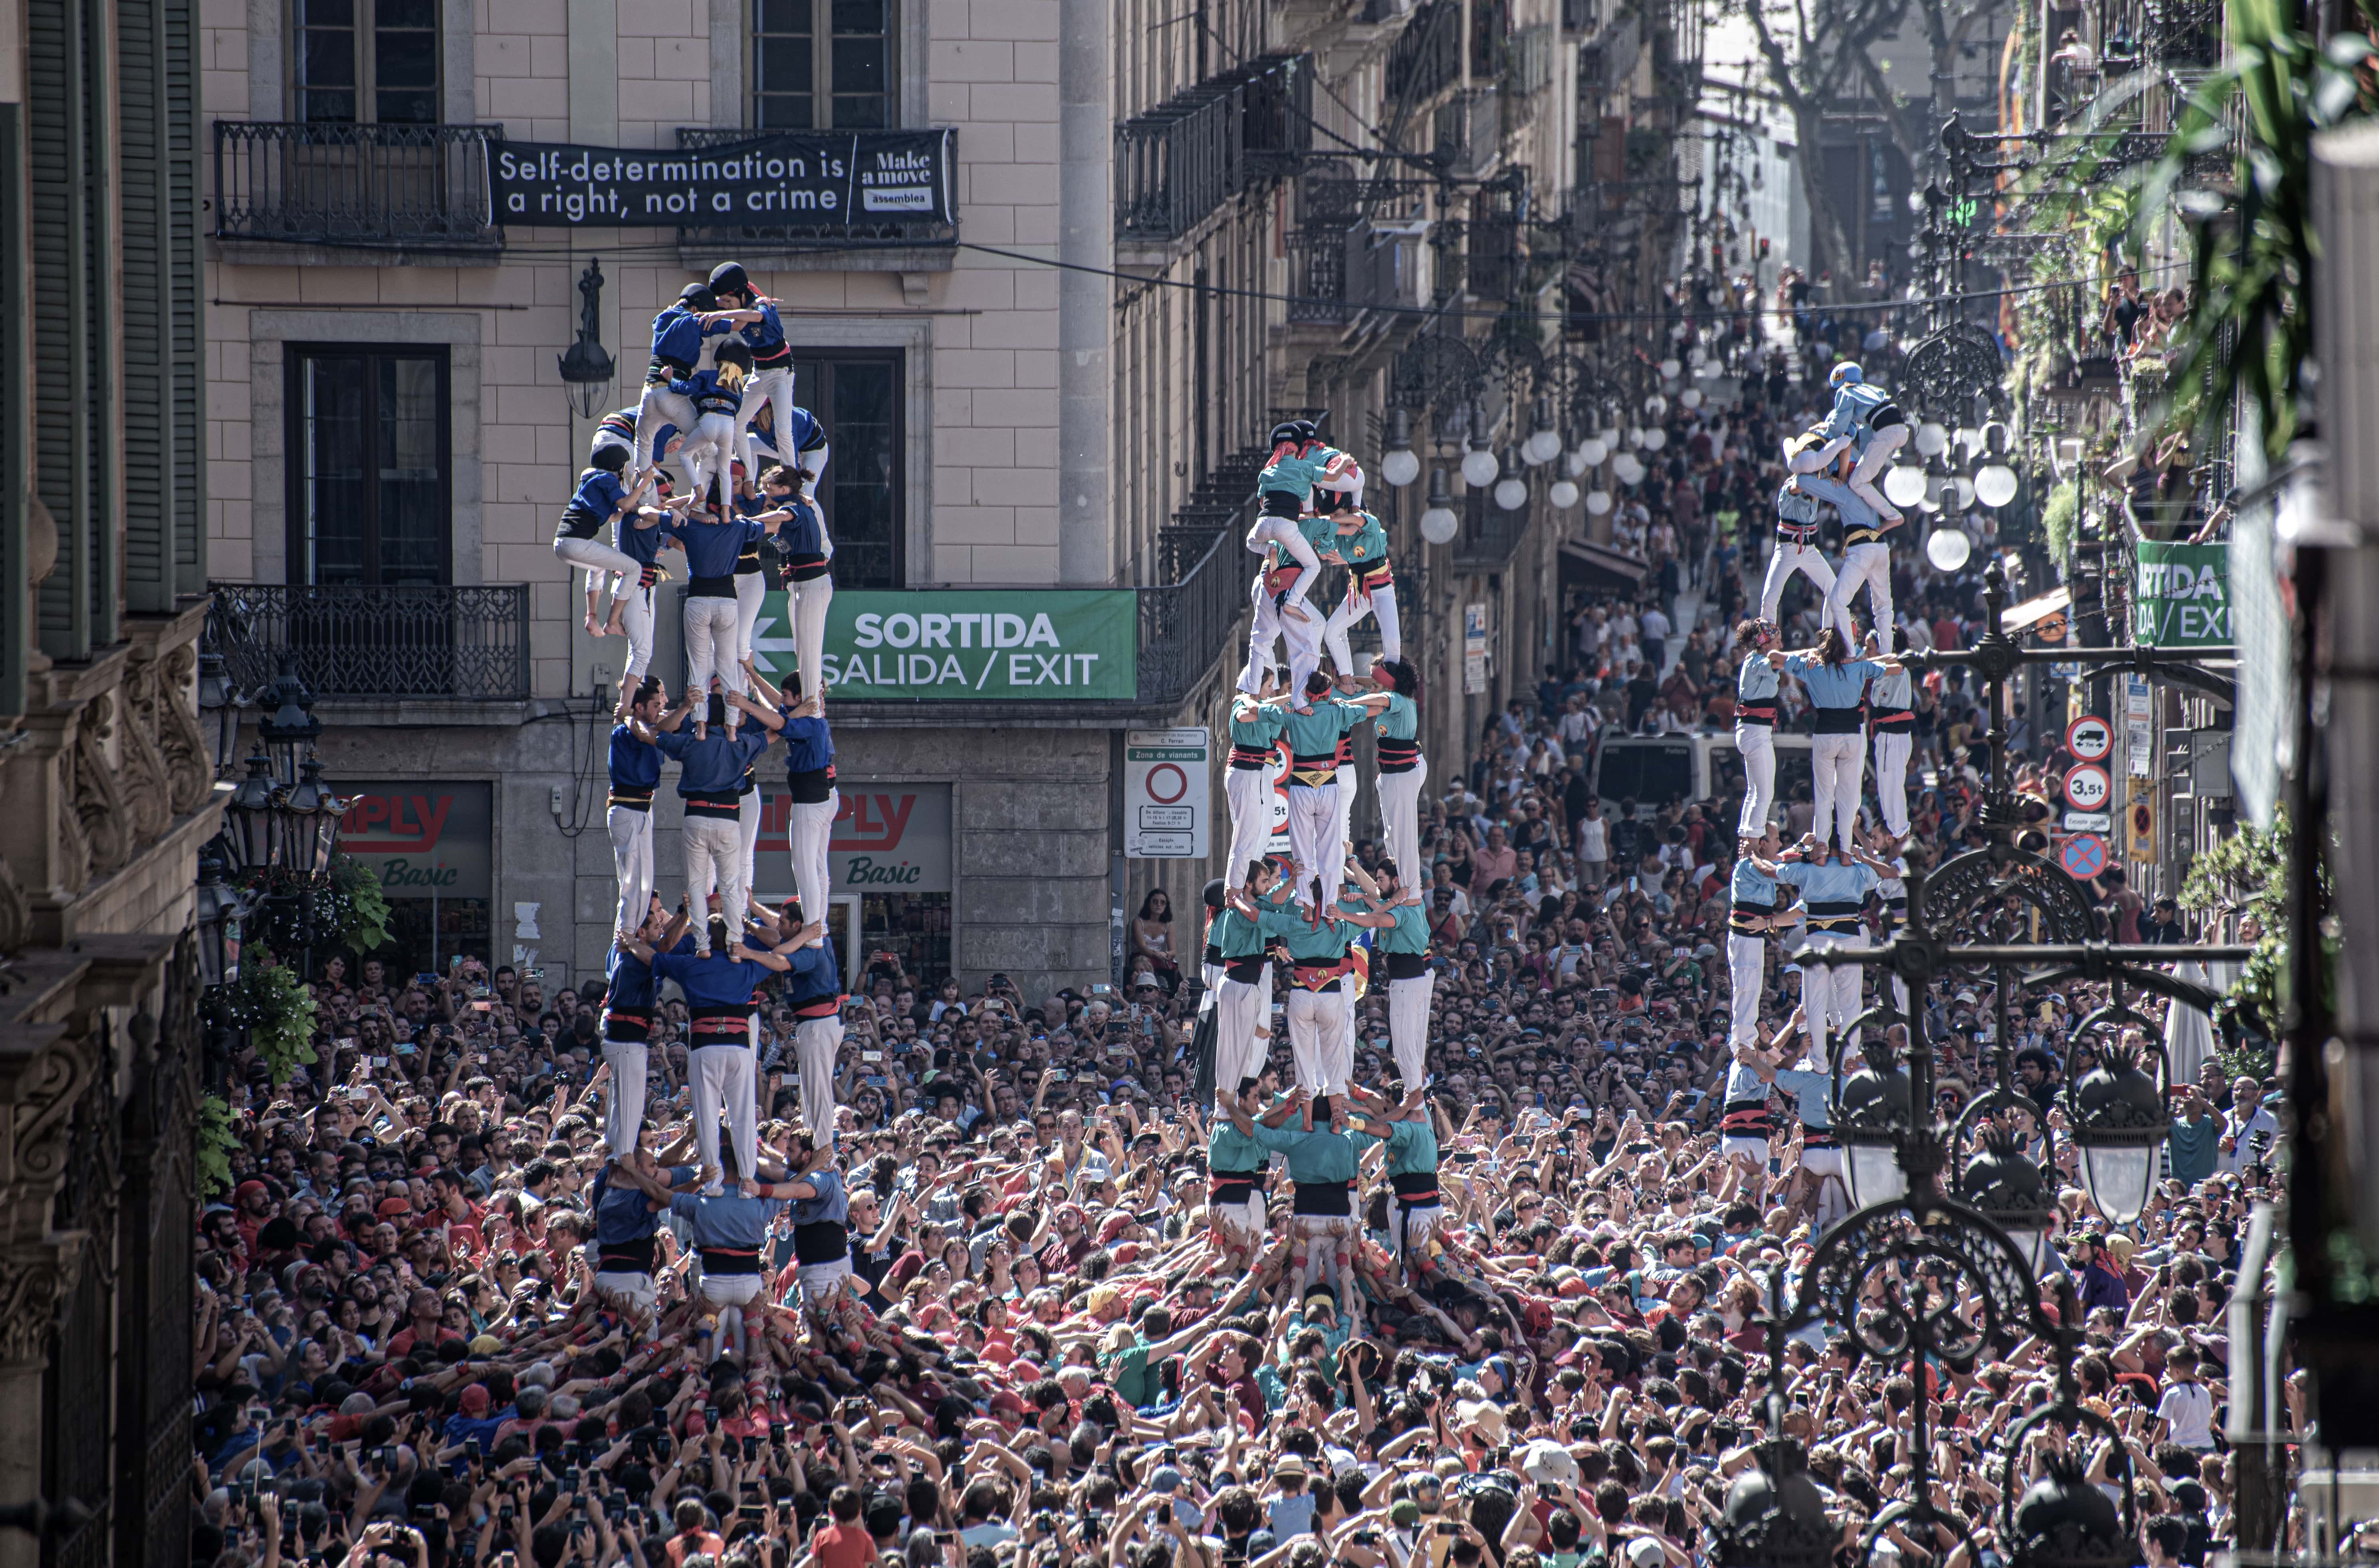 fly drvn long distance car service is also built for group travel, perfect for this group of castells in Barcelona.